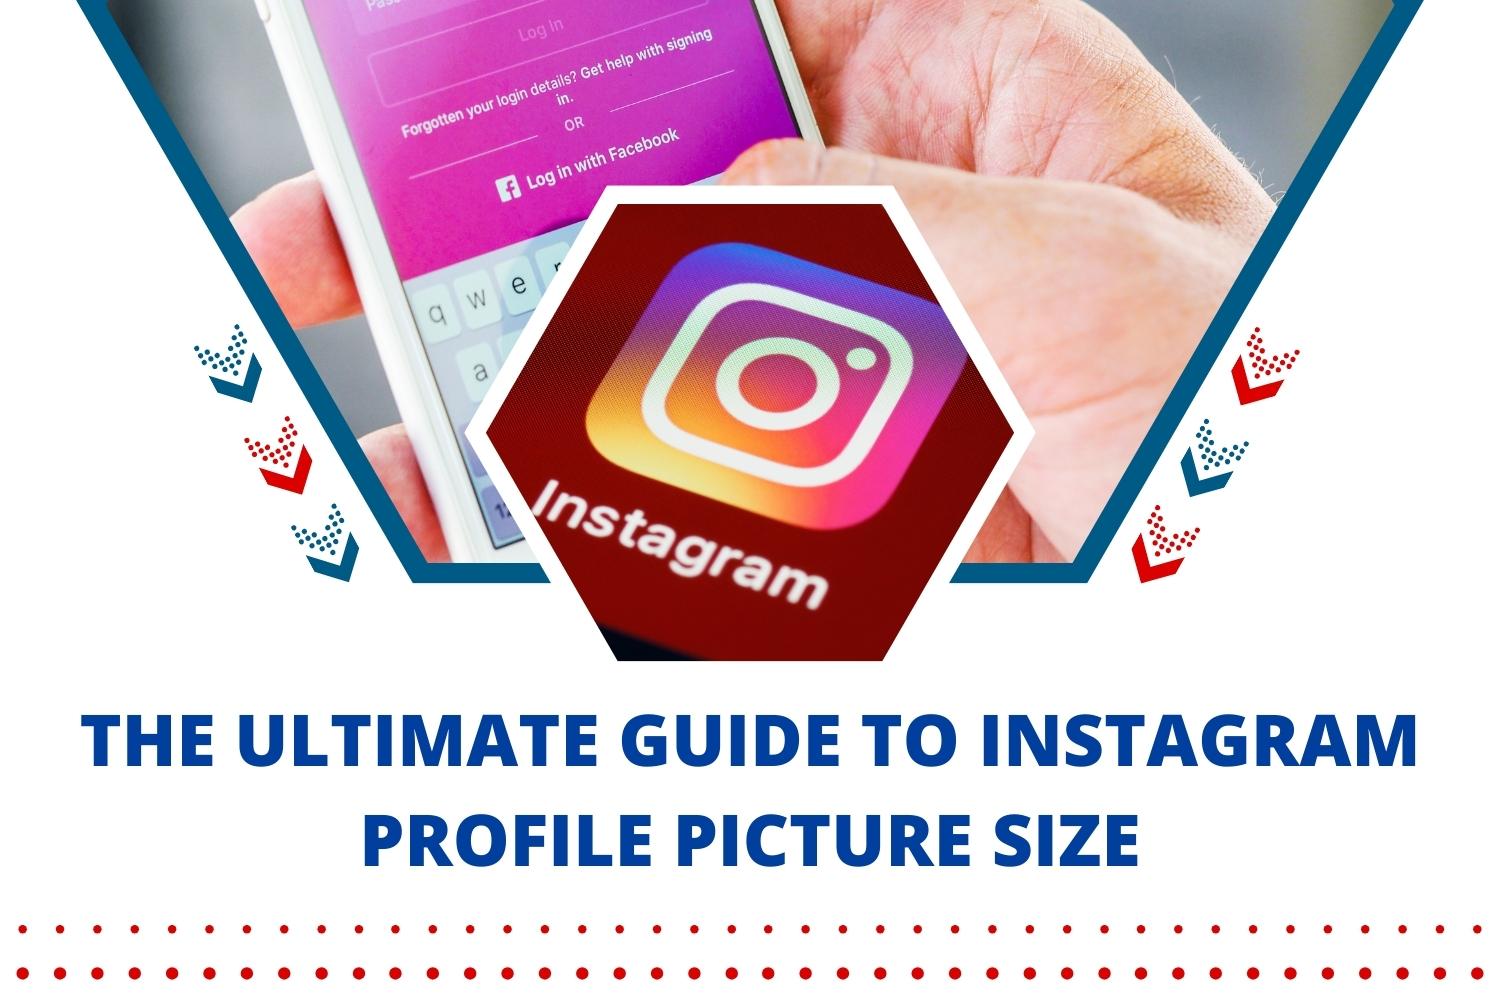 The Ultimate Guide to Instagram Profile Picture Size